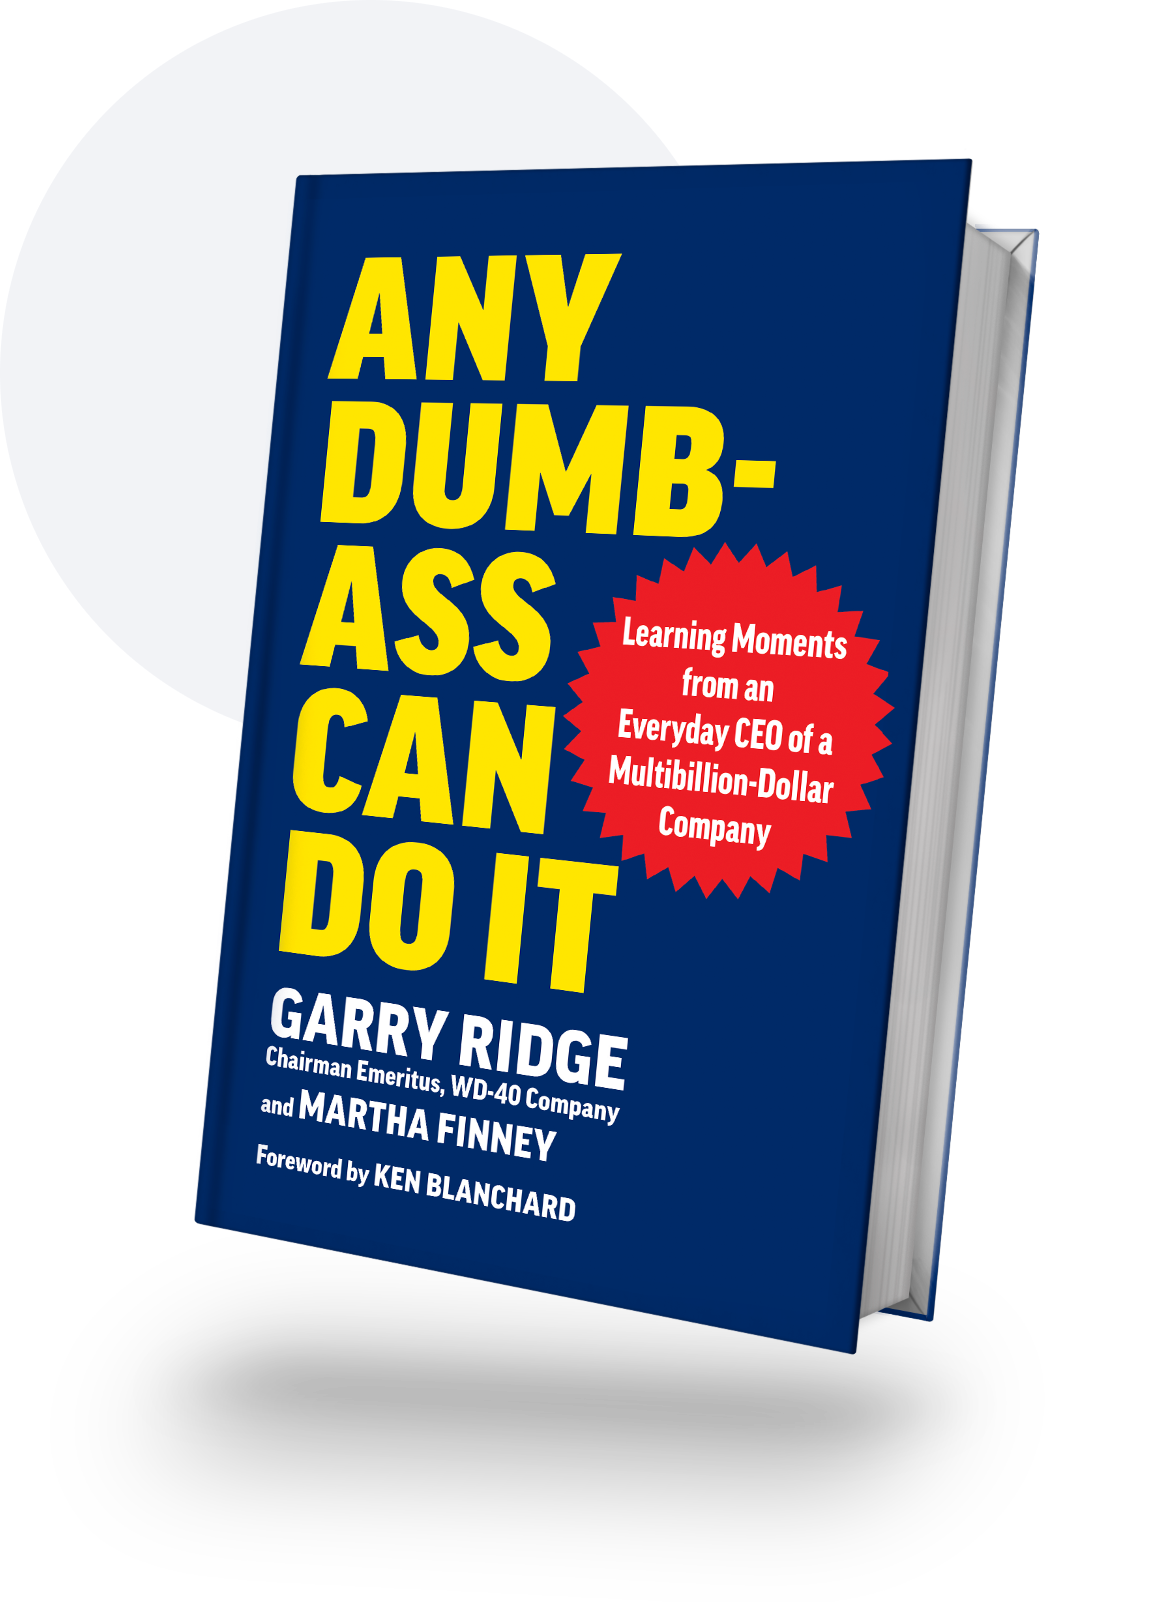 Any Dumb-ass Can Do It by Garry Ridge